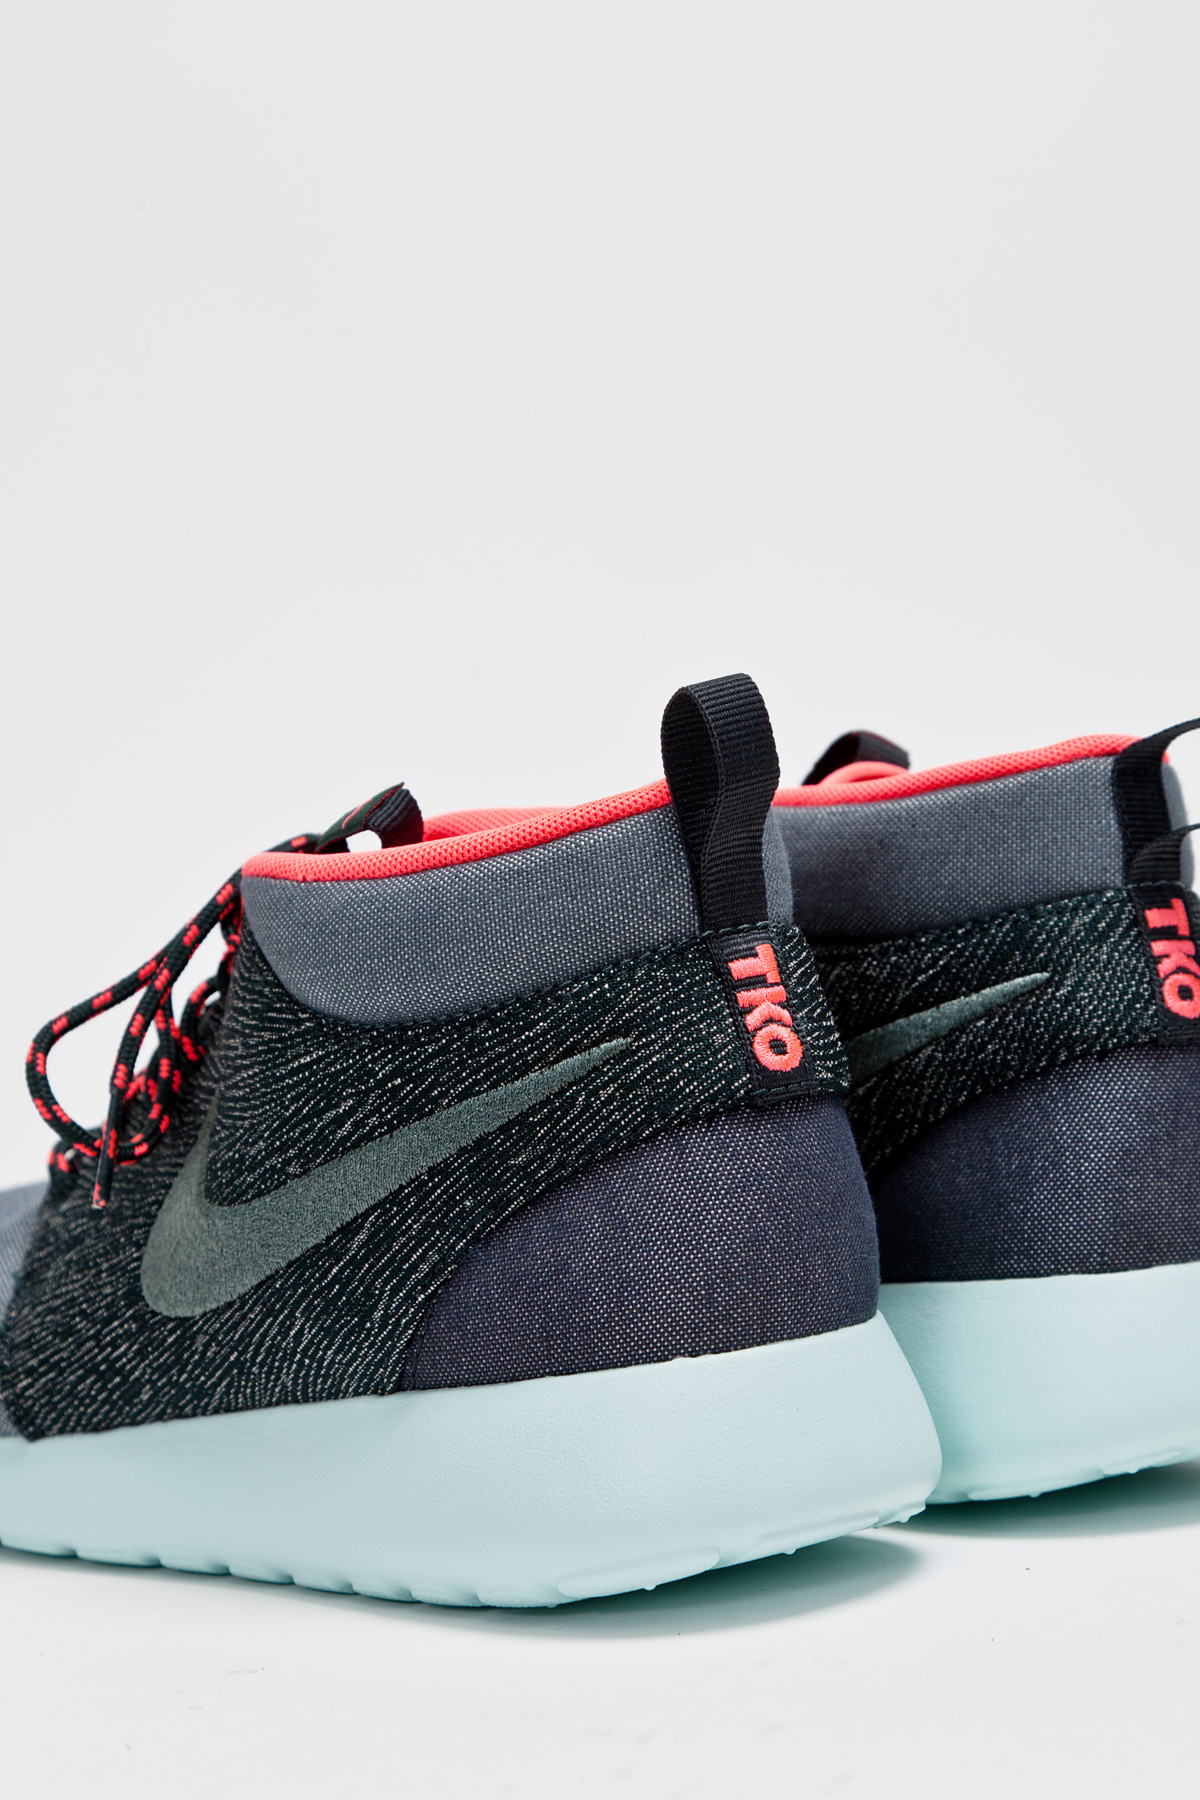 how much roshes cost